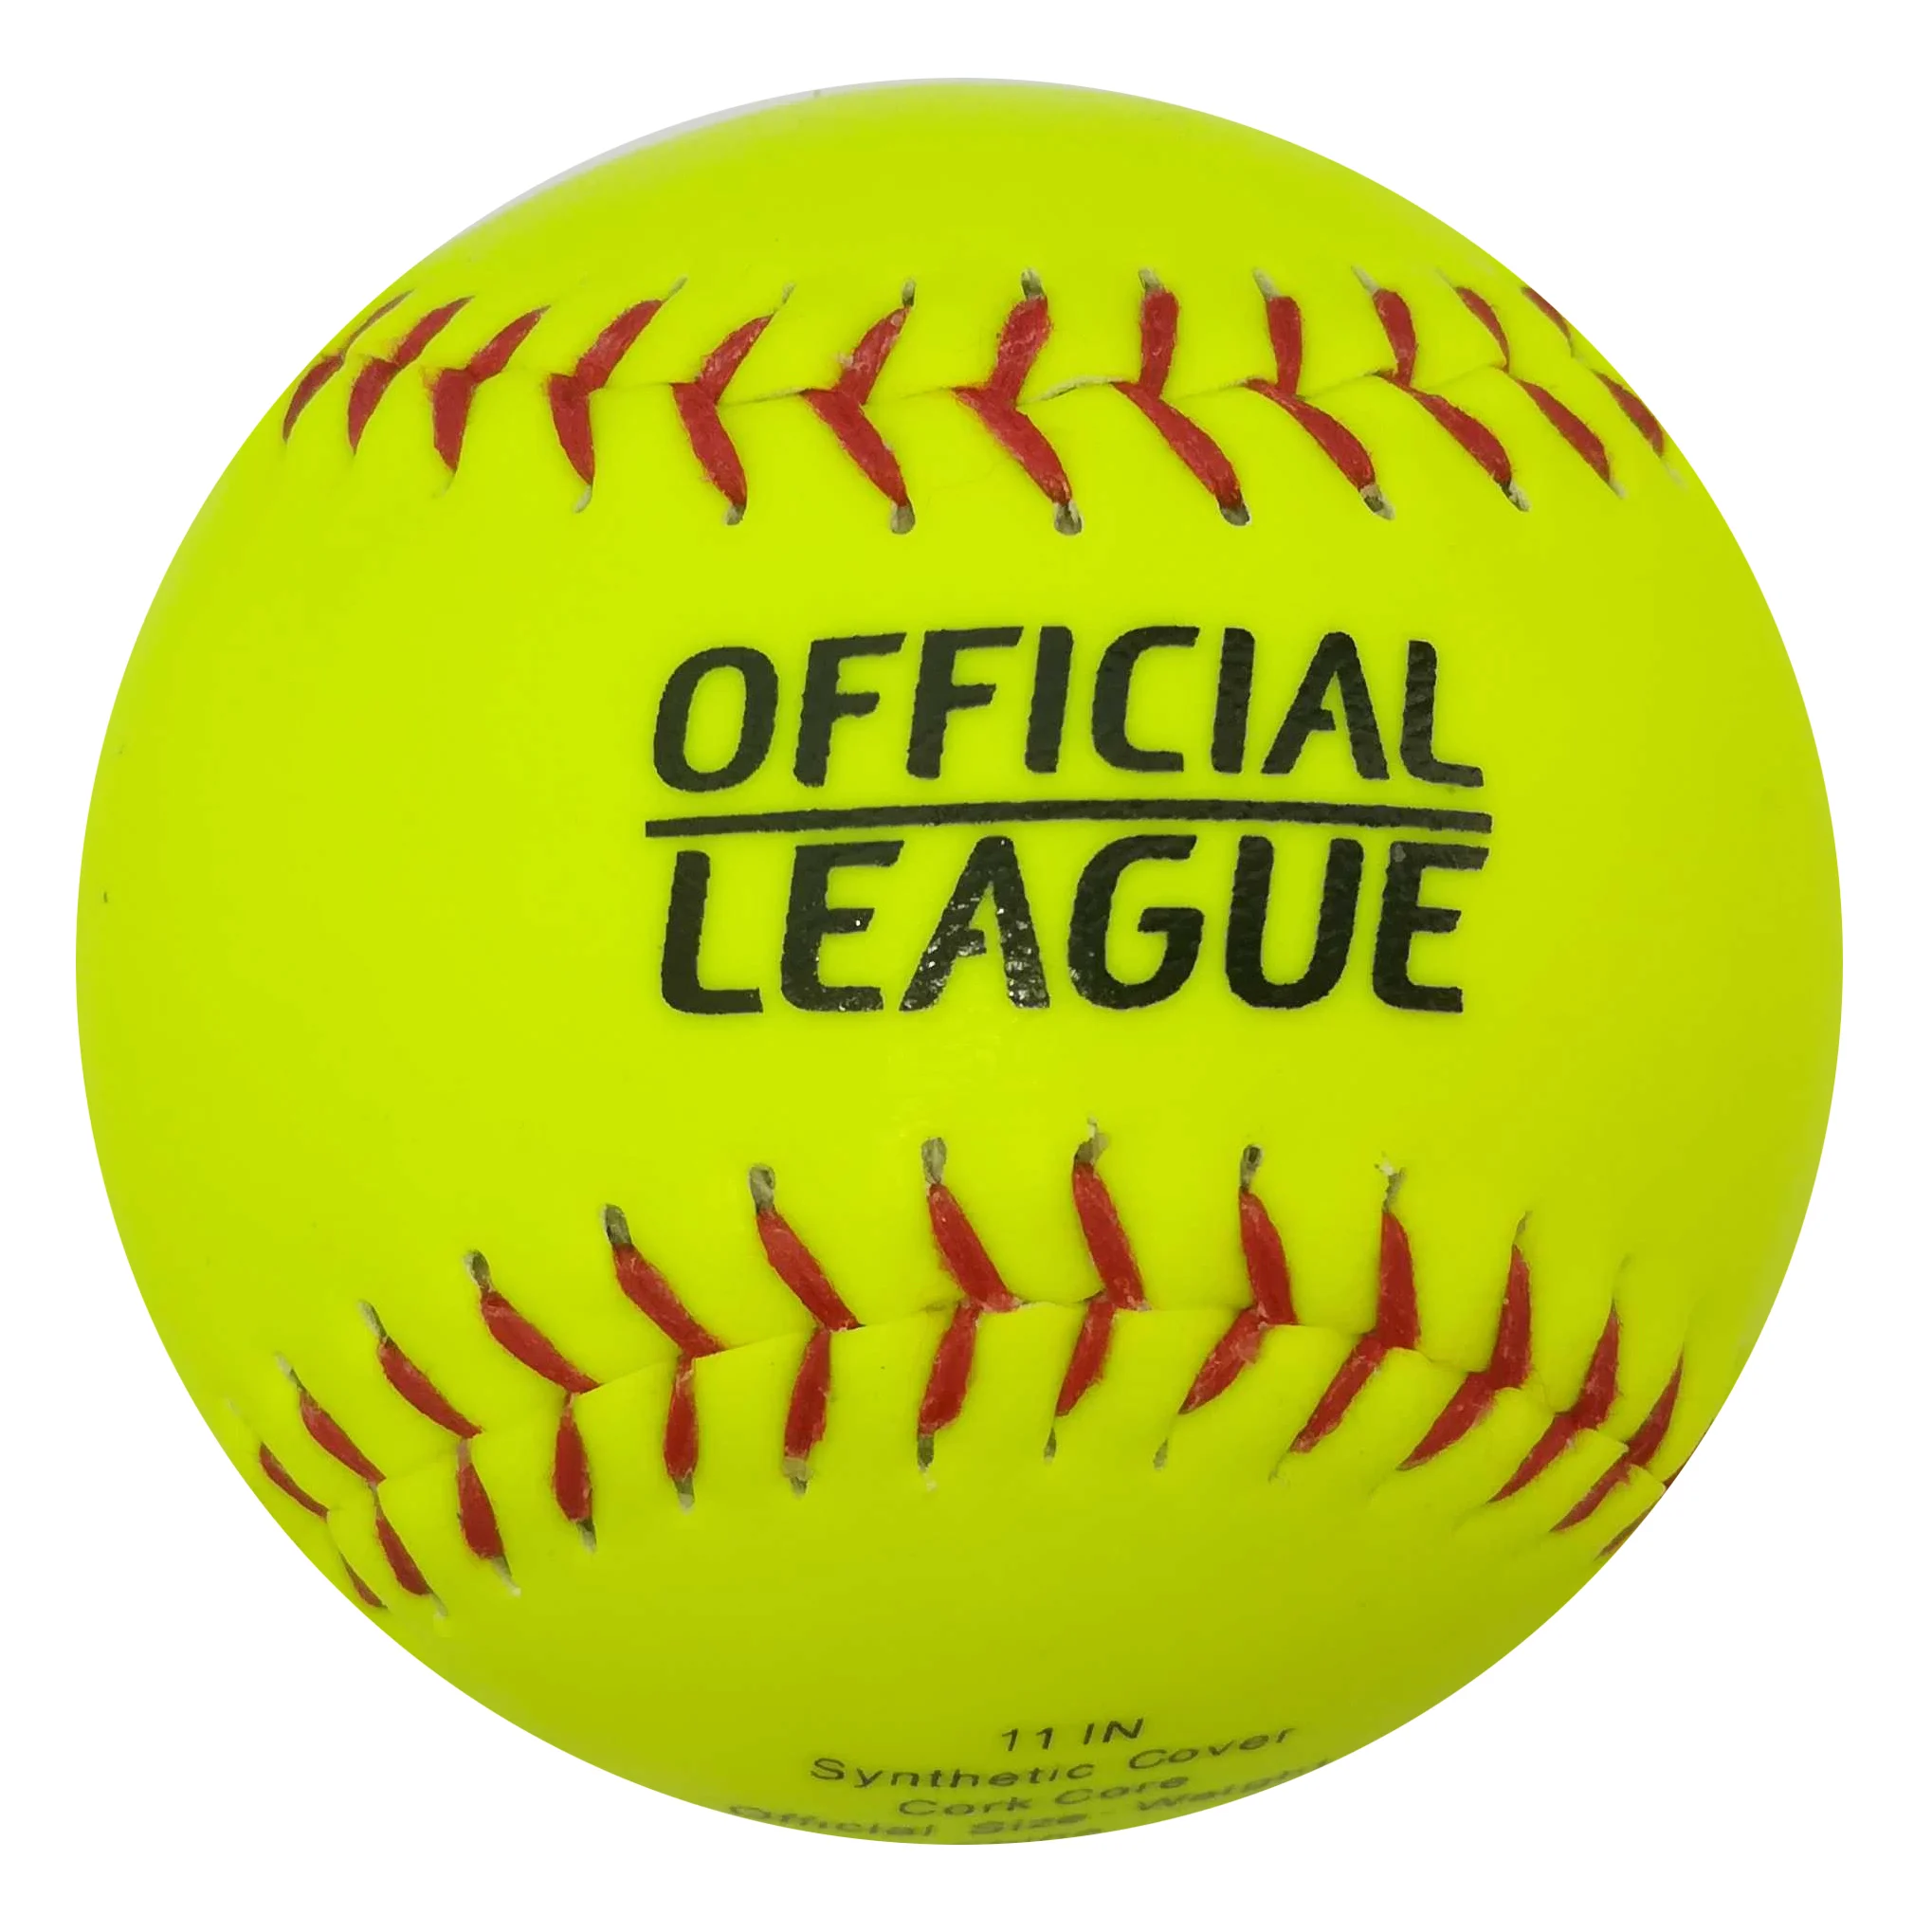 

synthetic leather+ cork core 12'' softball balls custom logo official size and weight training quality softball, Optical yellow